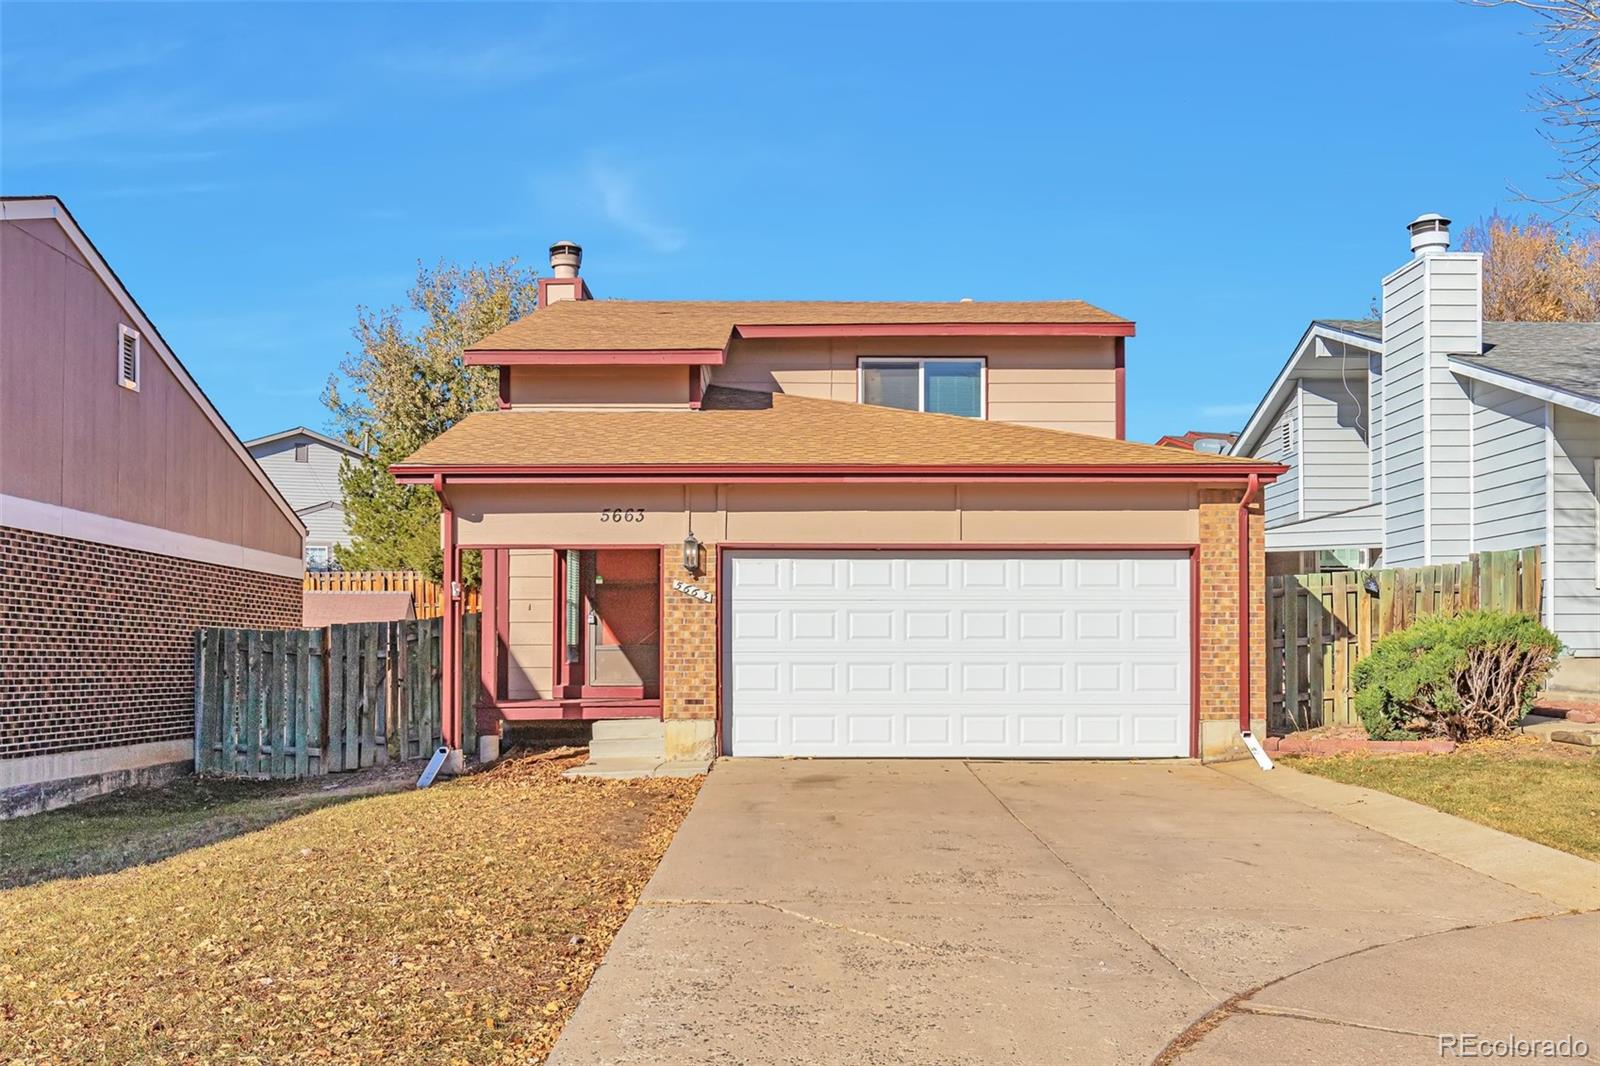 5663 W 71st Place, arvada MLS: 4734739 Beds: 3 Baths: 2 Price: $505,000